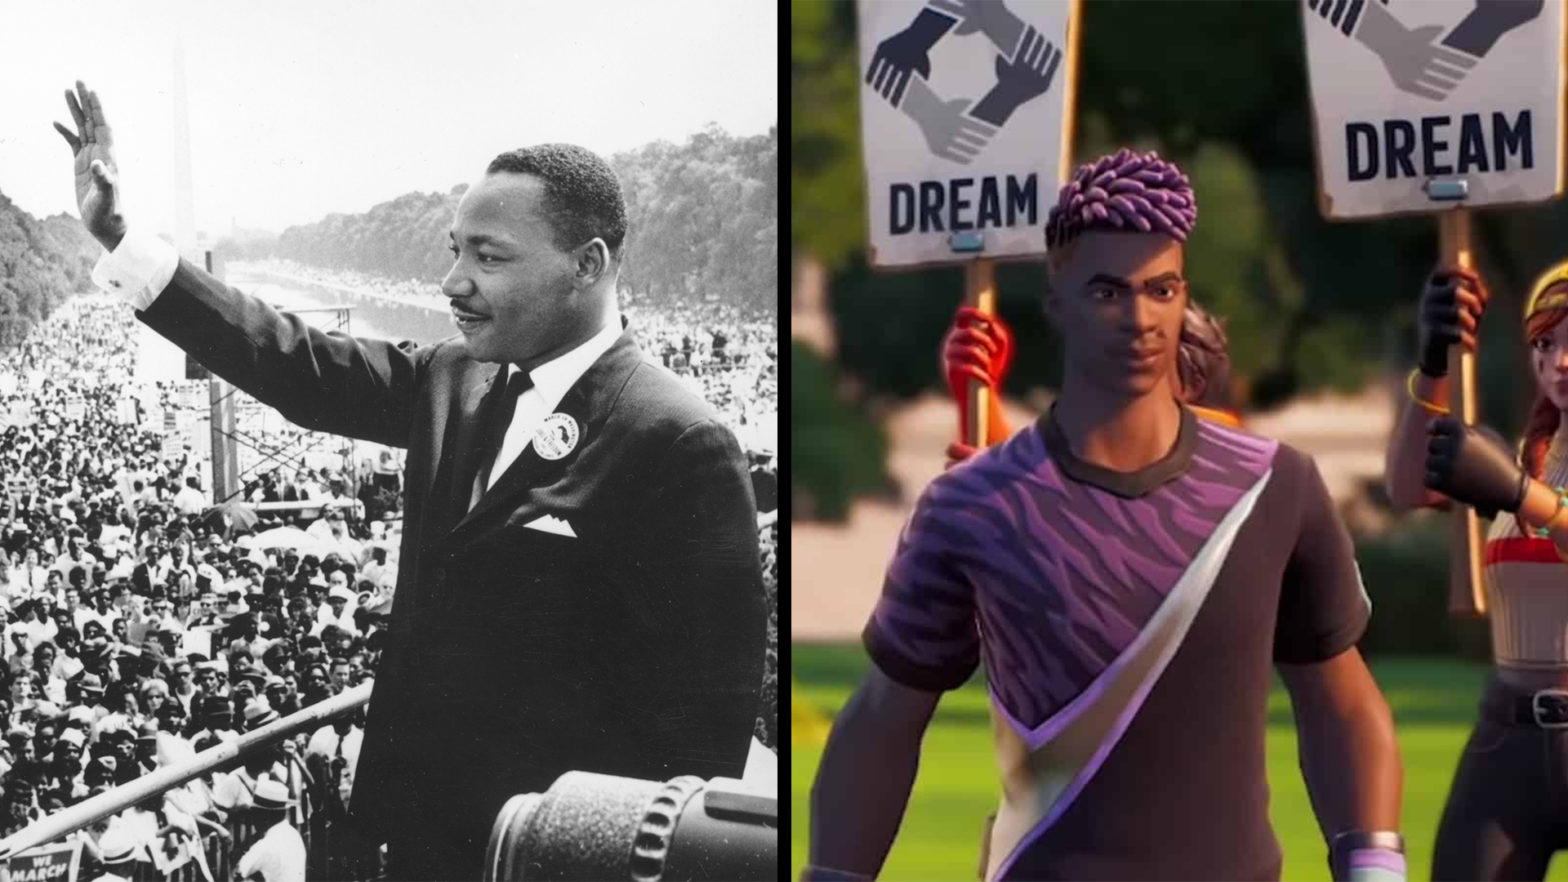 Fortnite Held A MLK 'I Have A Dream' Experience And Failed To Prevent Issues Like Whip Cracking Emotes